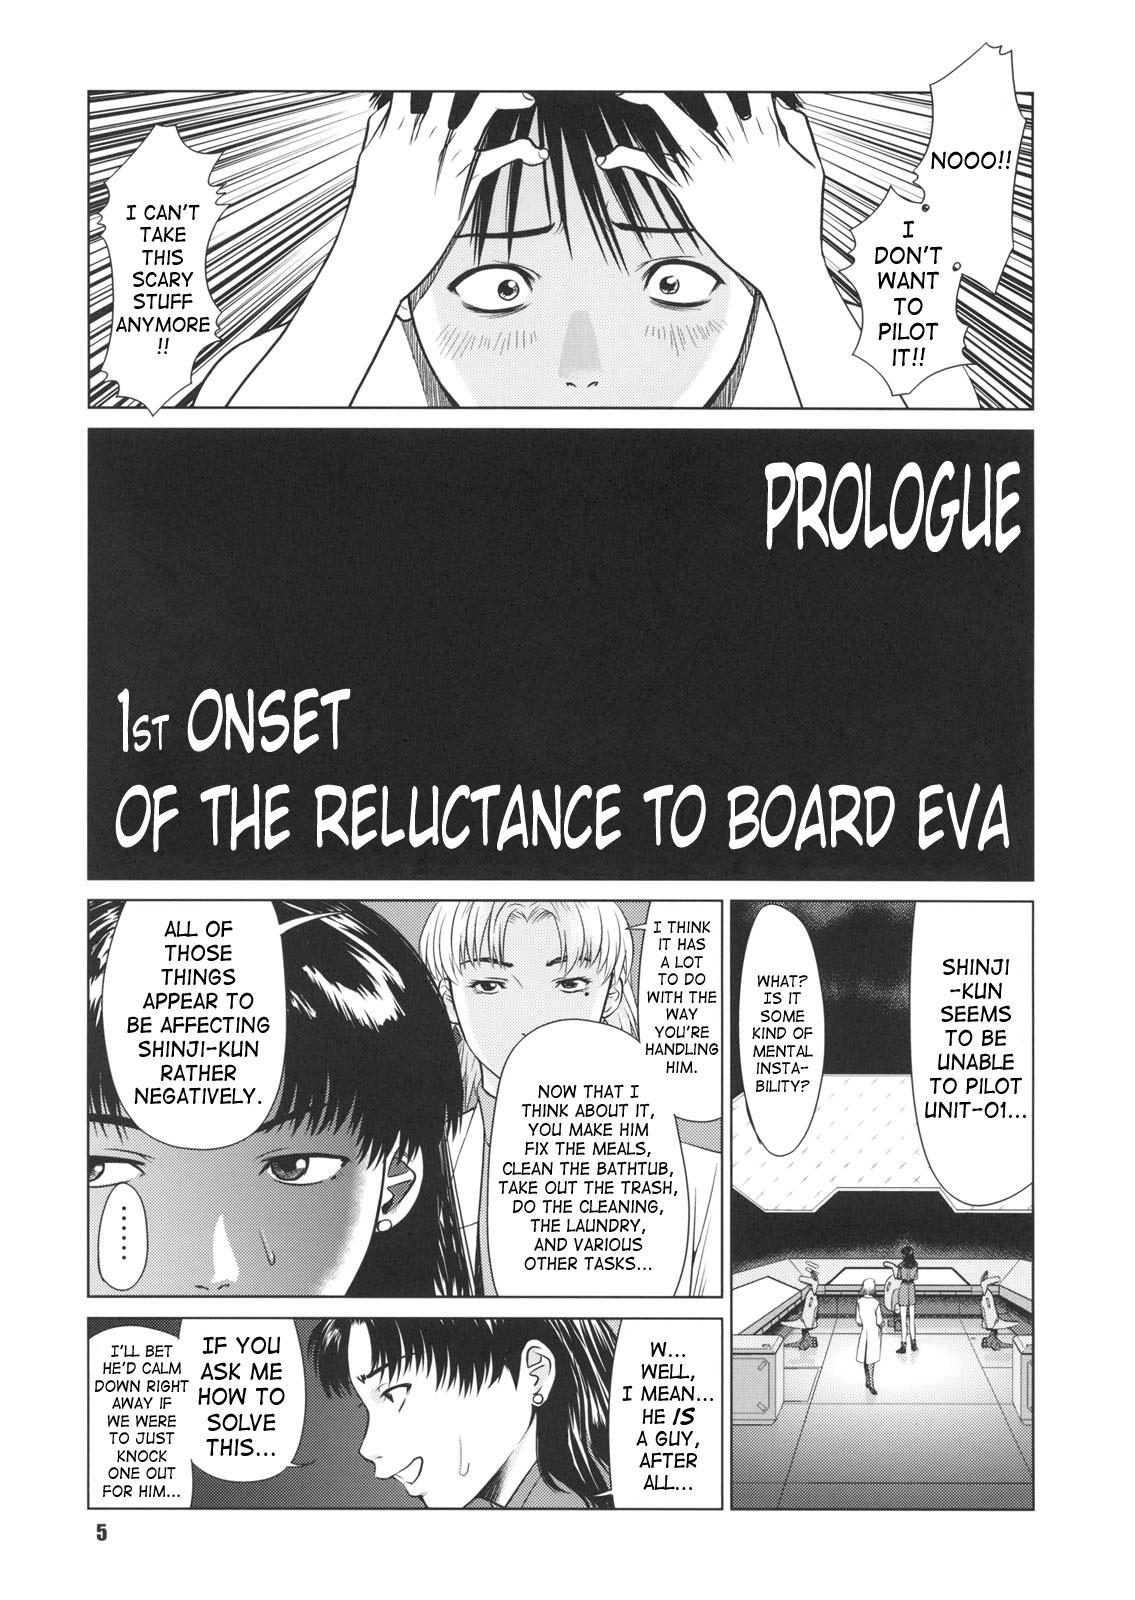 Barely 18 Porn Ayanami no Okage | Thanks to Ayanami... - Neon genesis evangelion Assfingering - Page 4